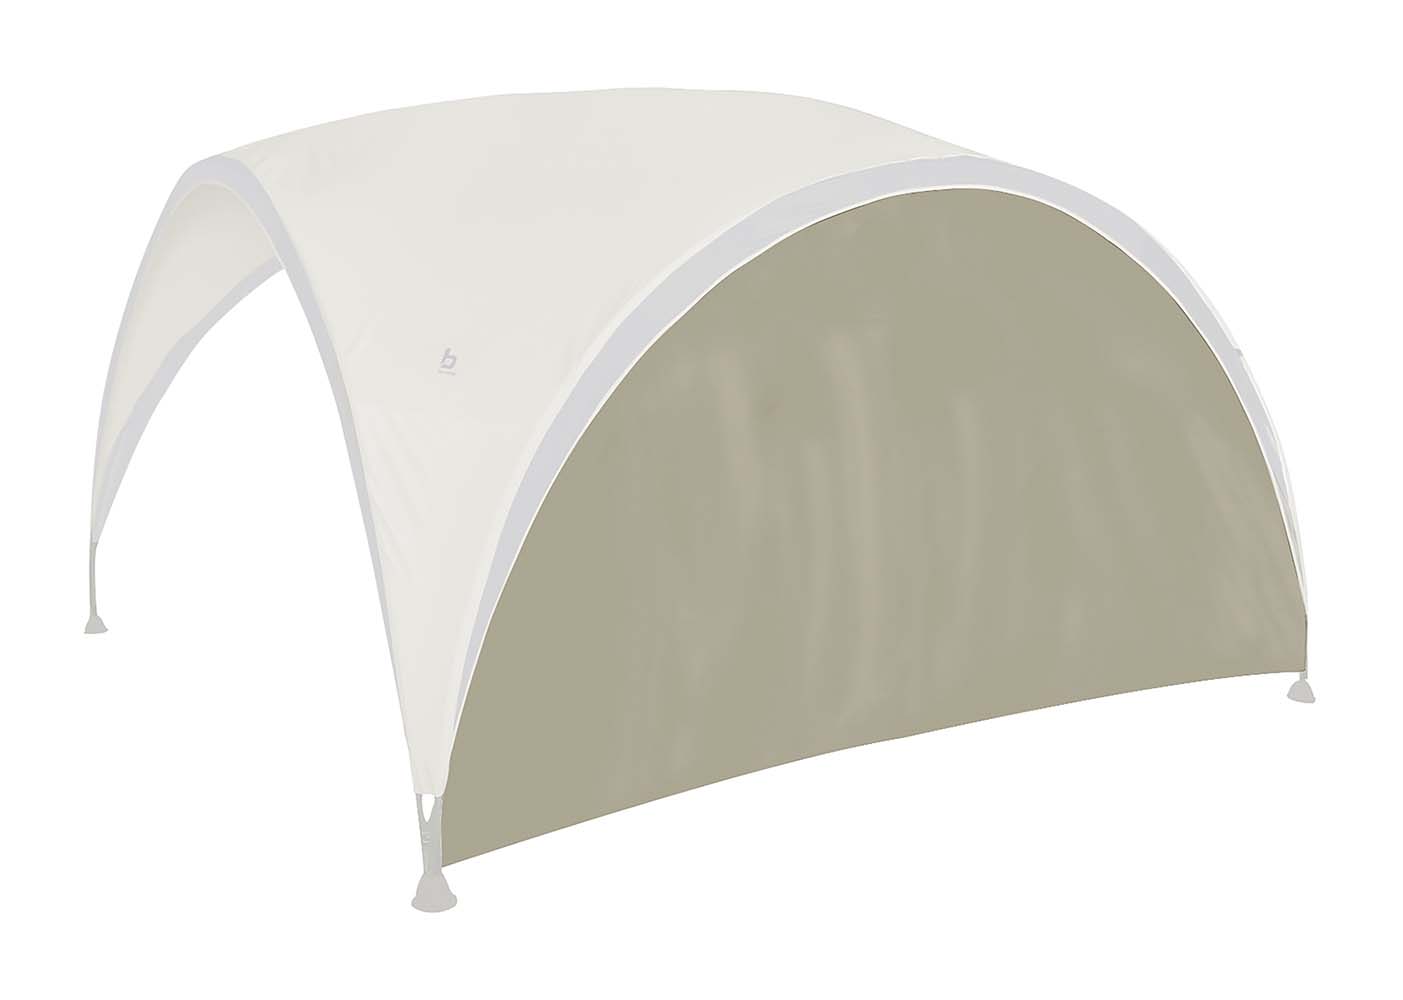 4472211 Bo-Camp - Party Shelter Sidewall - Partyzelt medium 3,7x3,7x2,39 Meter - Seitenwand